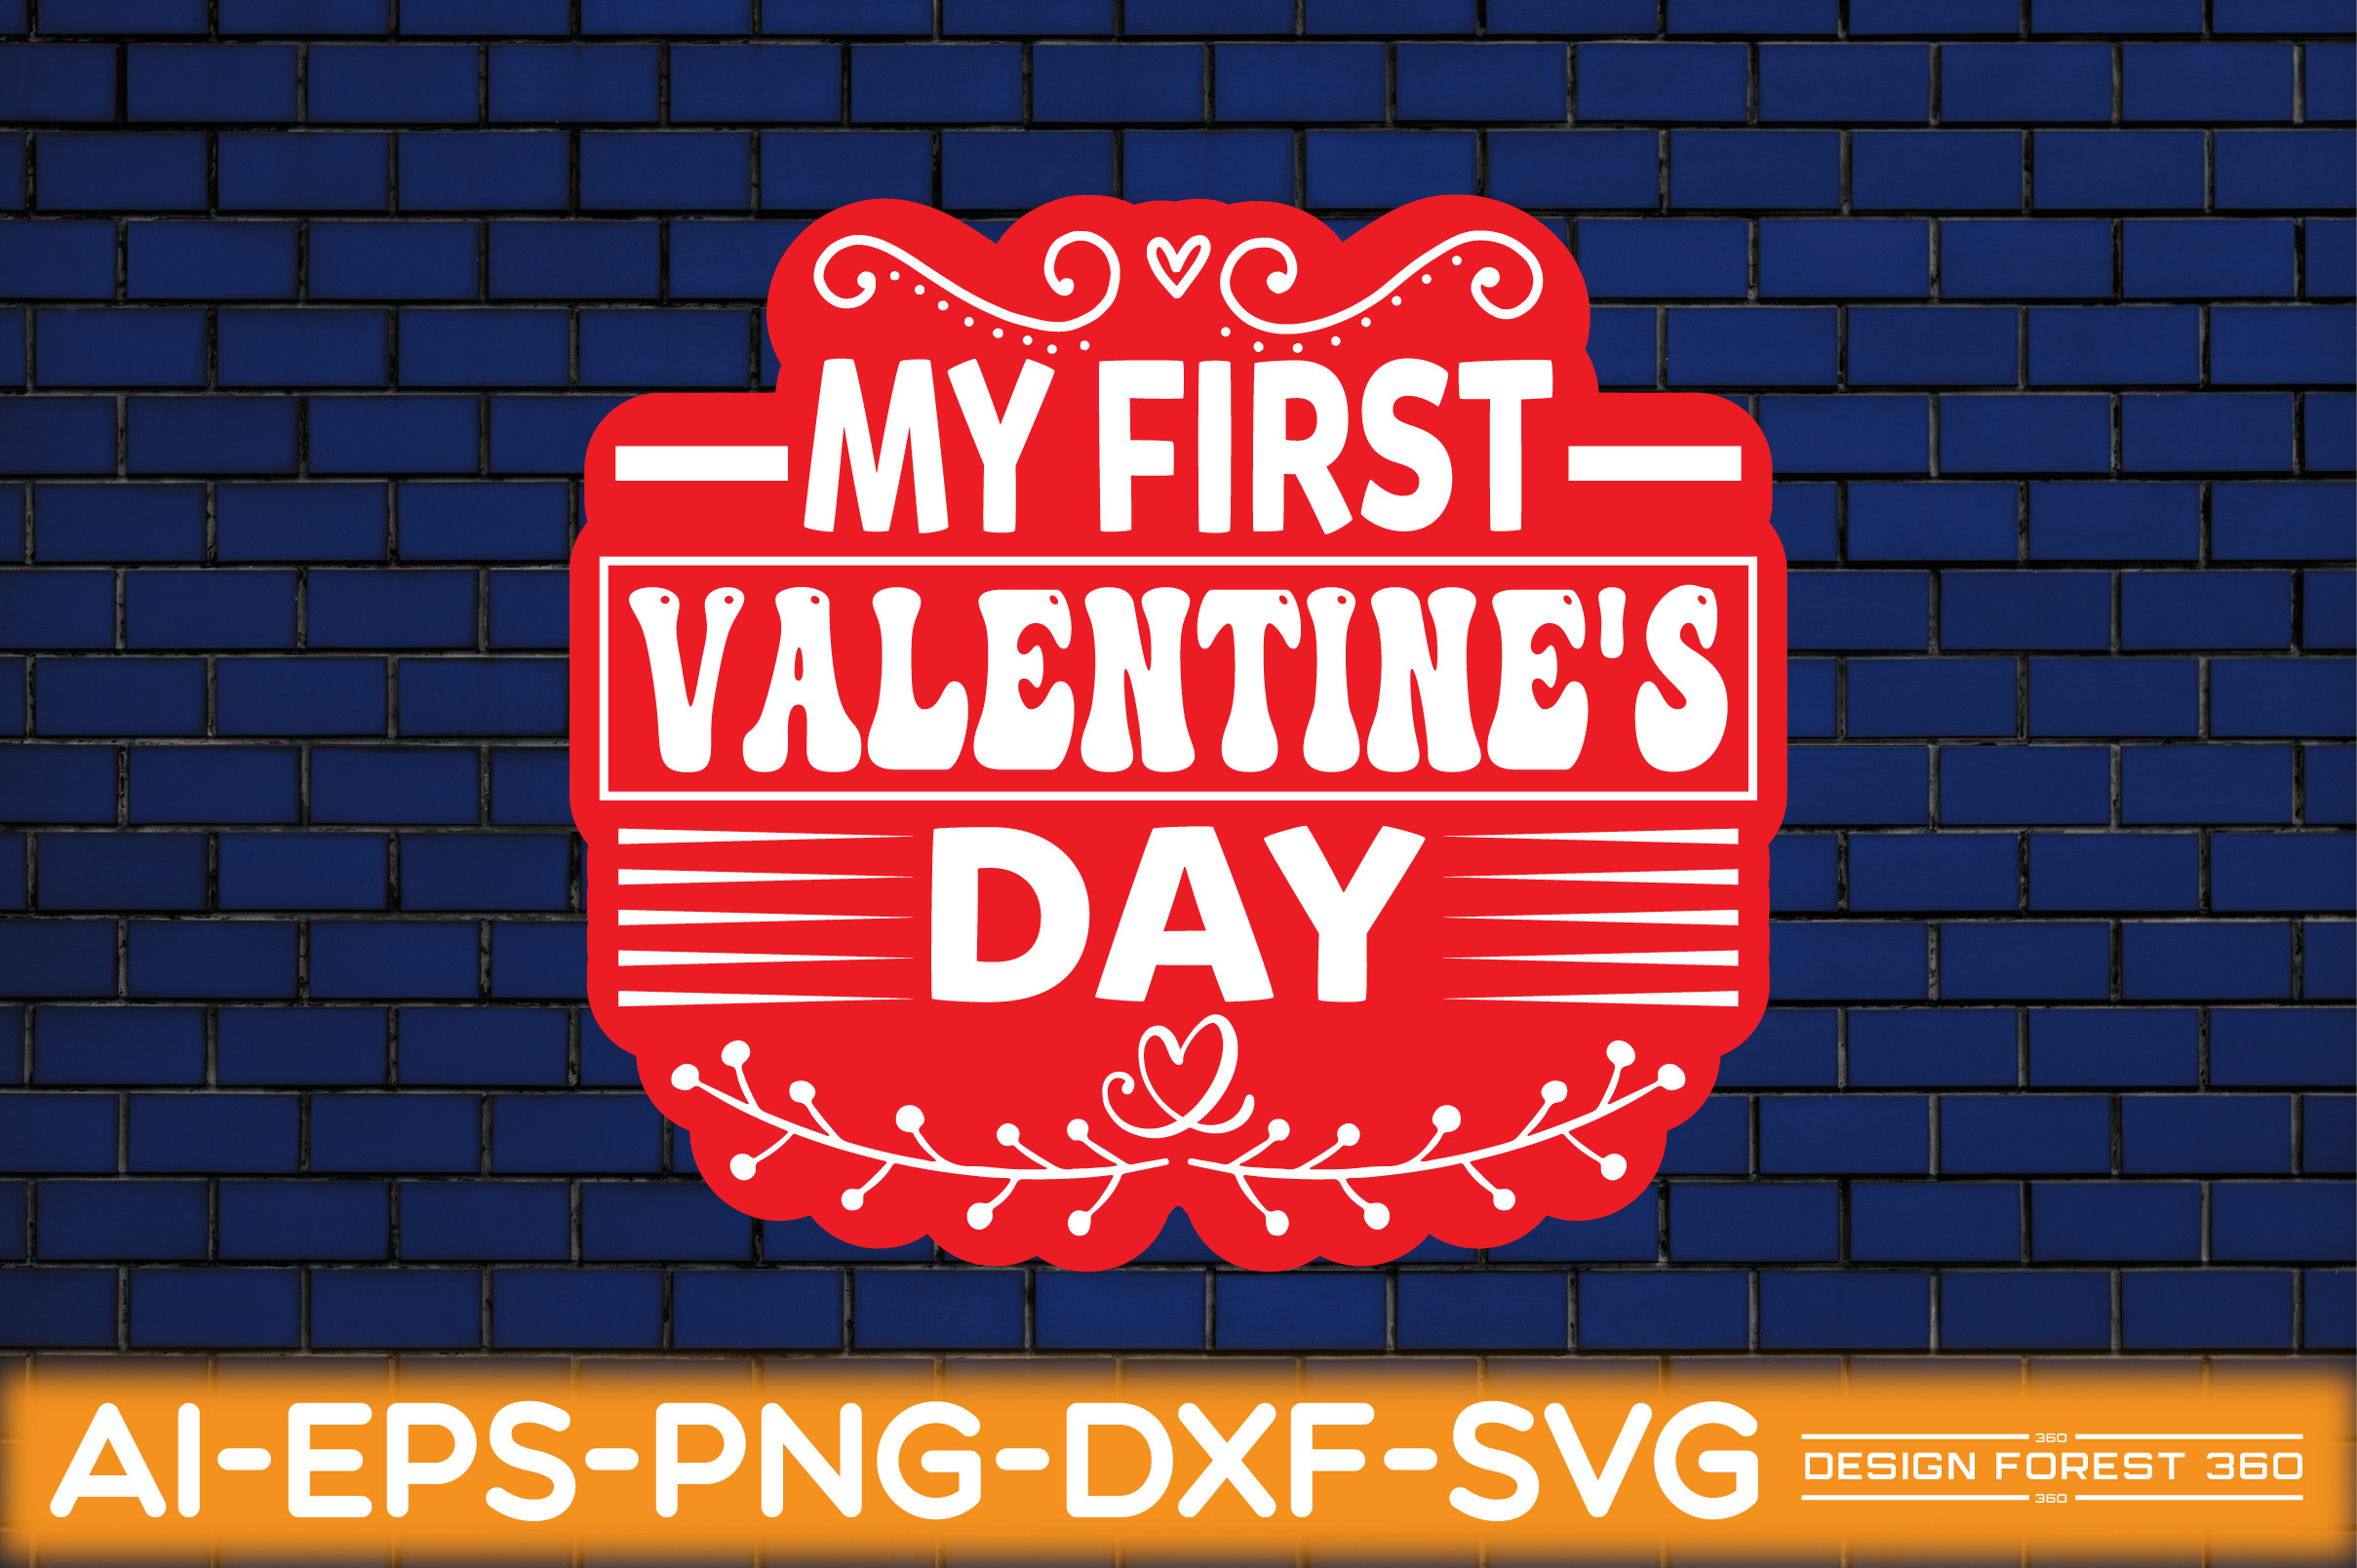 My First Valentine's Day Graphic by Design Forest 360 · Creative Fabrica